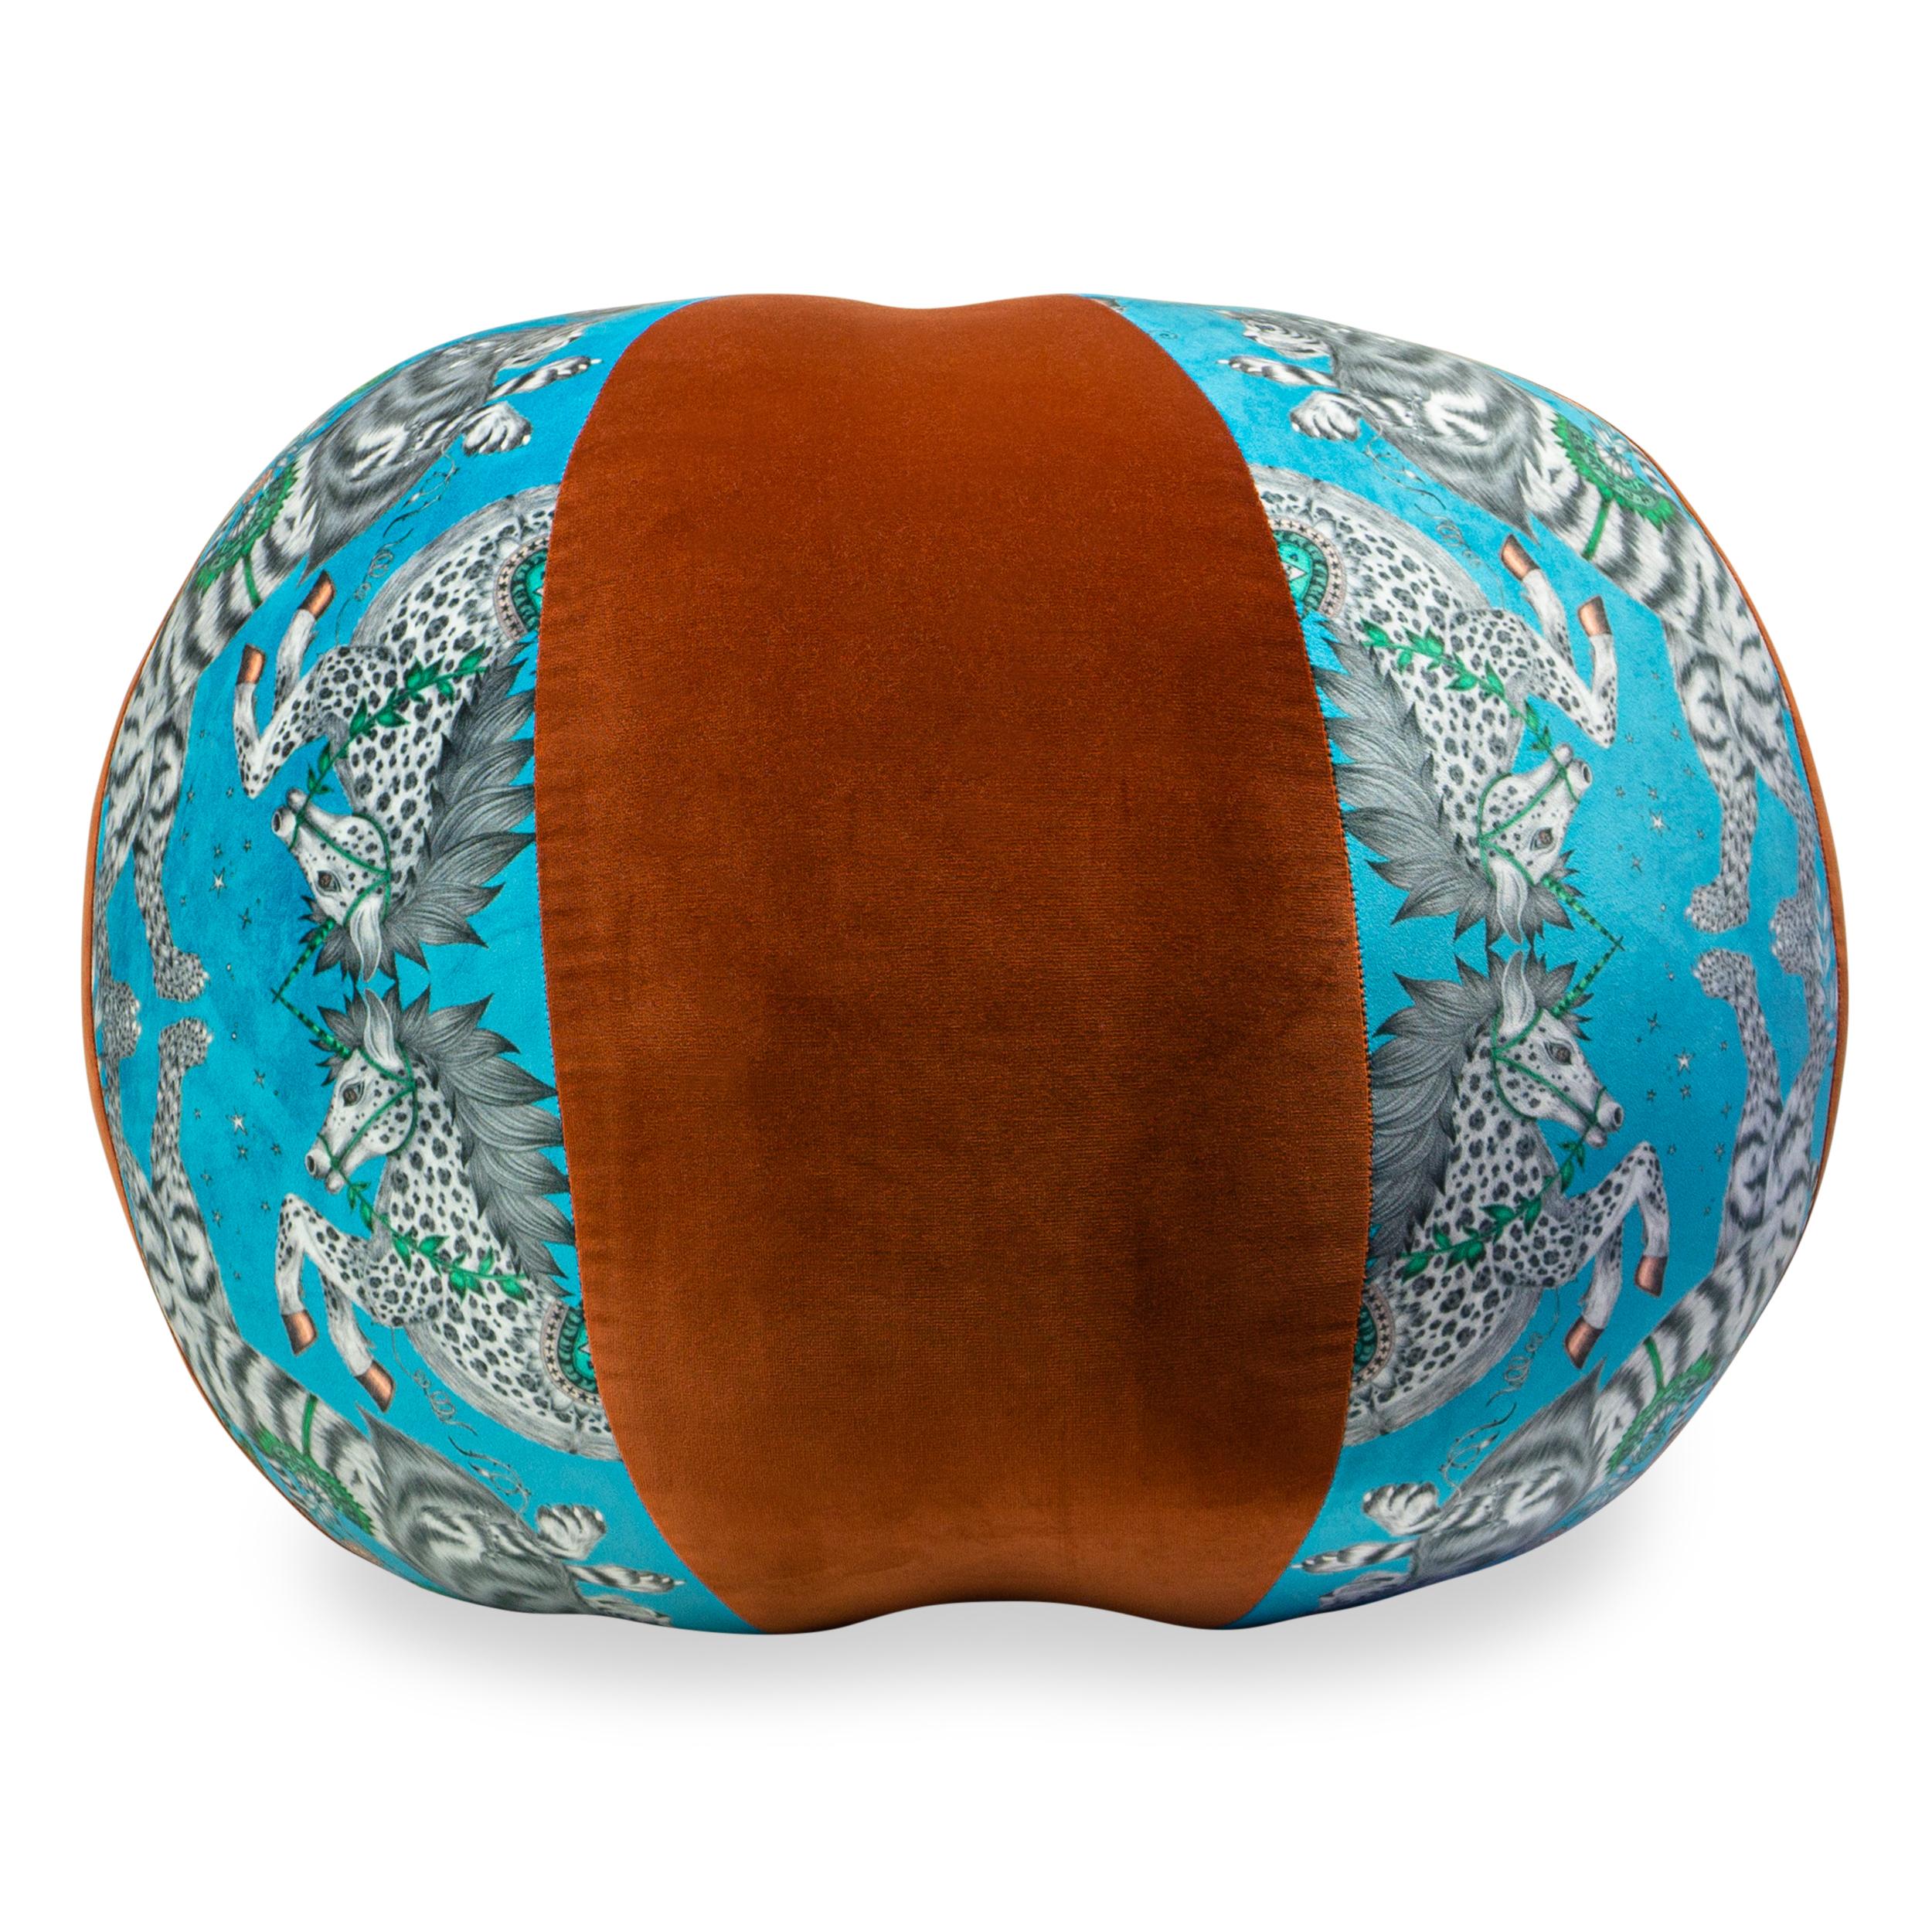 American Fantastical Beach Ball Pouf with Emma Shipley Printed Velvet Firm for Sitting For Sale